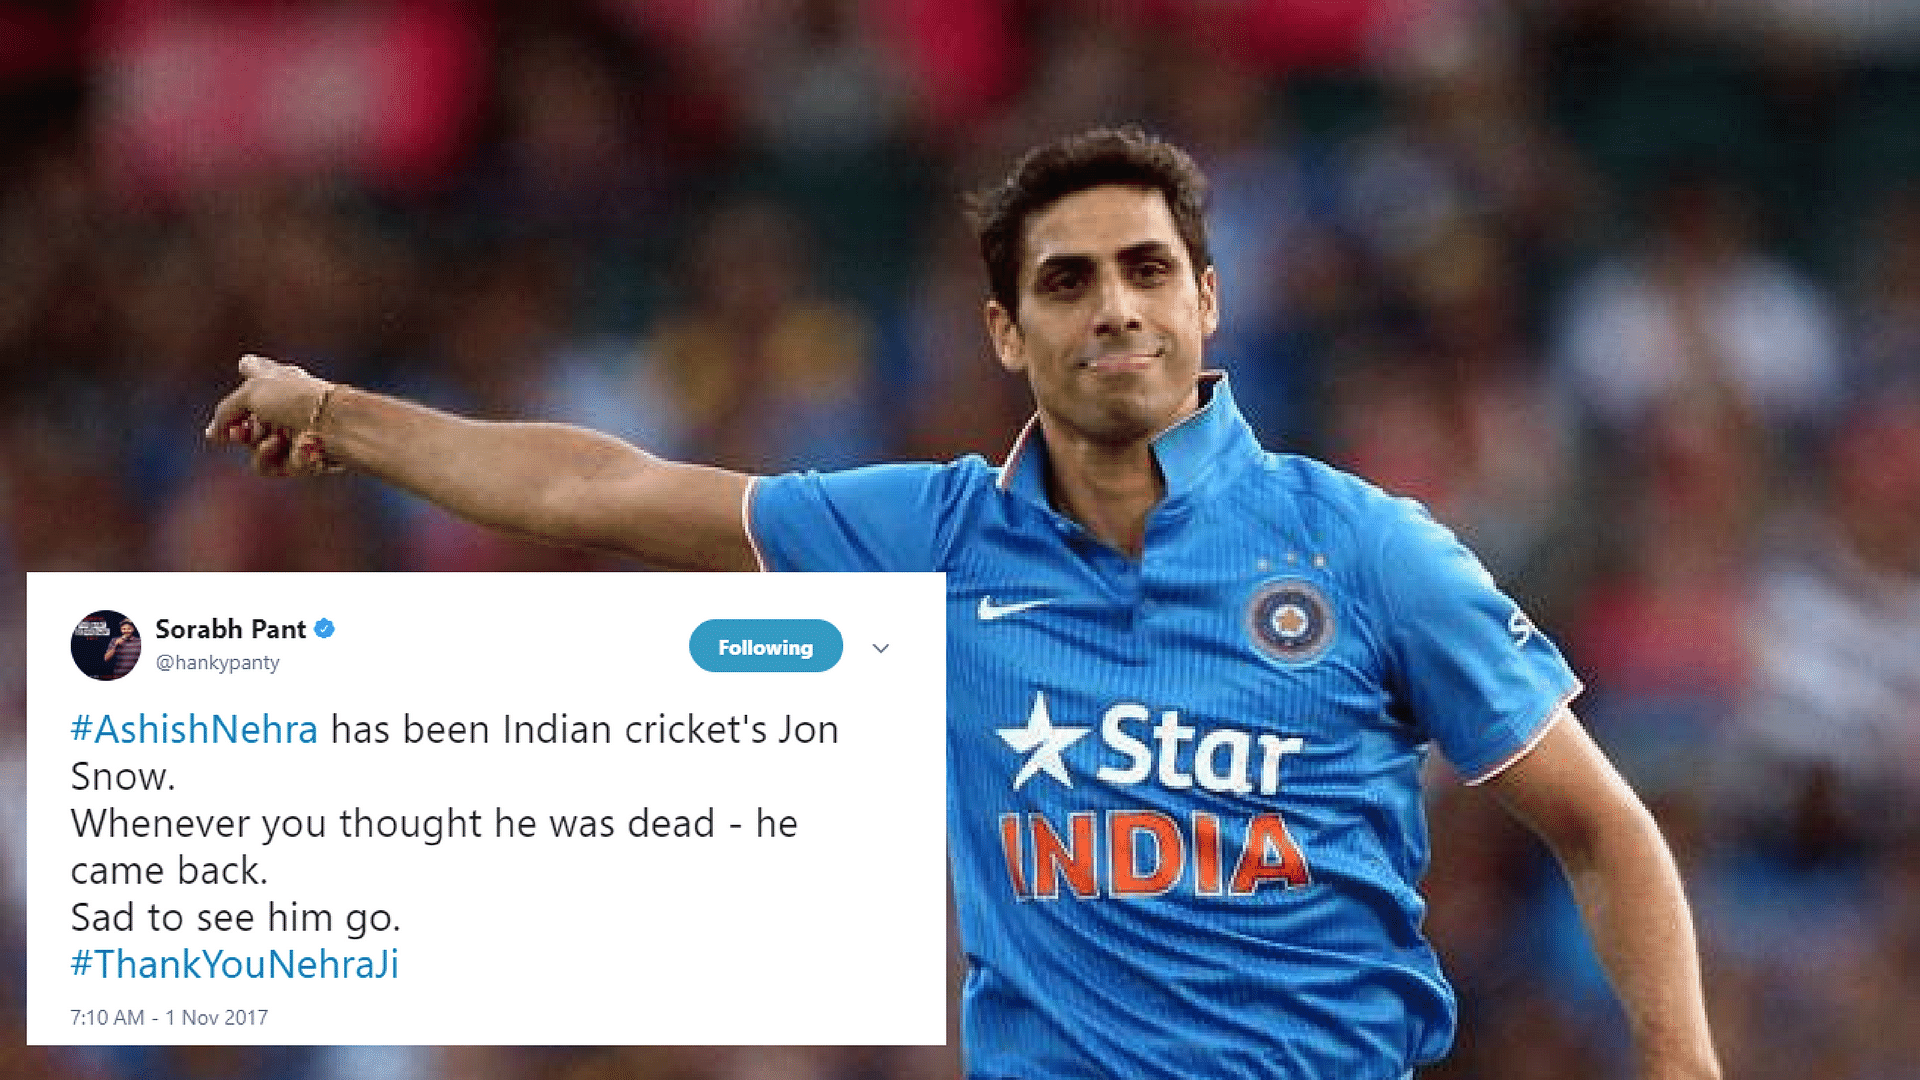 Bowled over by Nehra’s candid goodbye, the rest of Twitter could not help but honour the fast bowling legend.